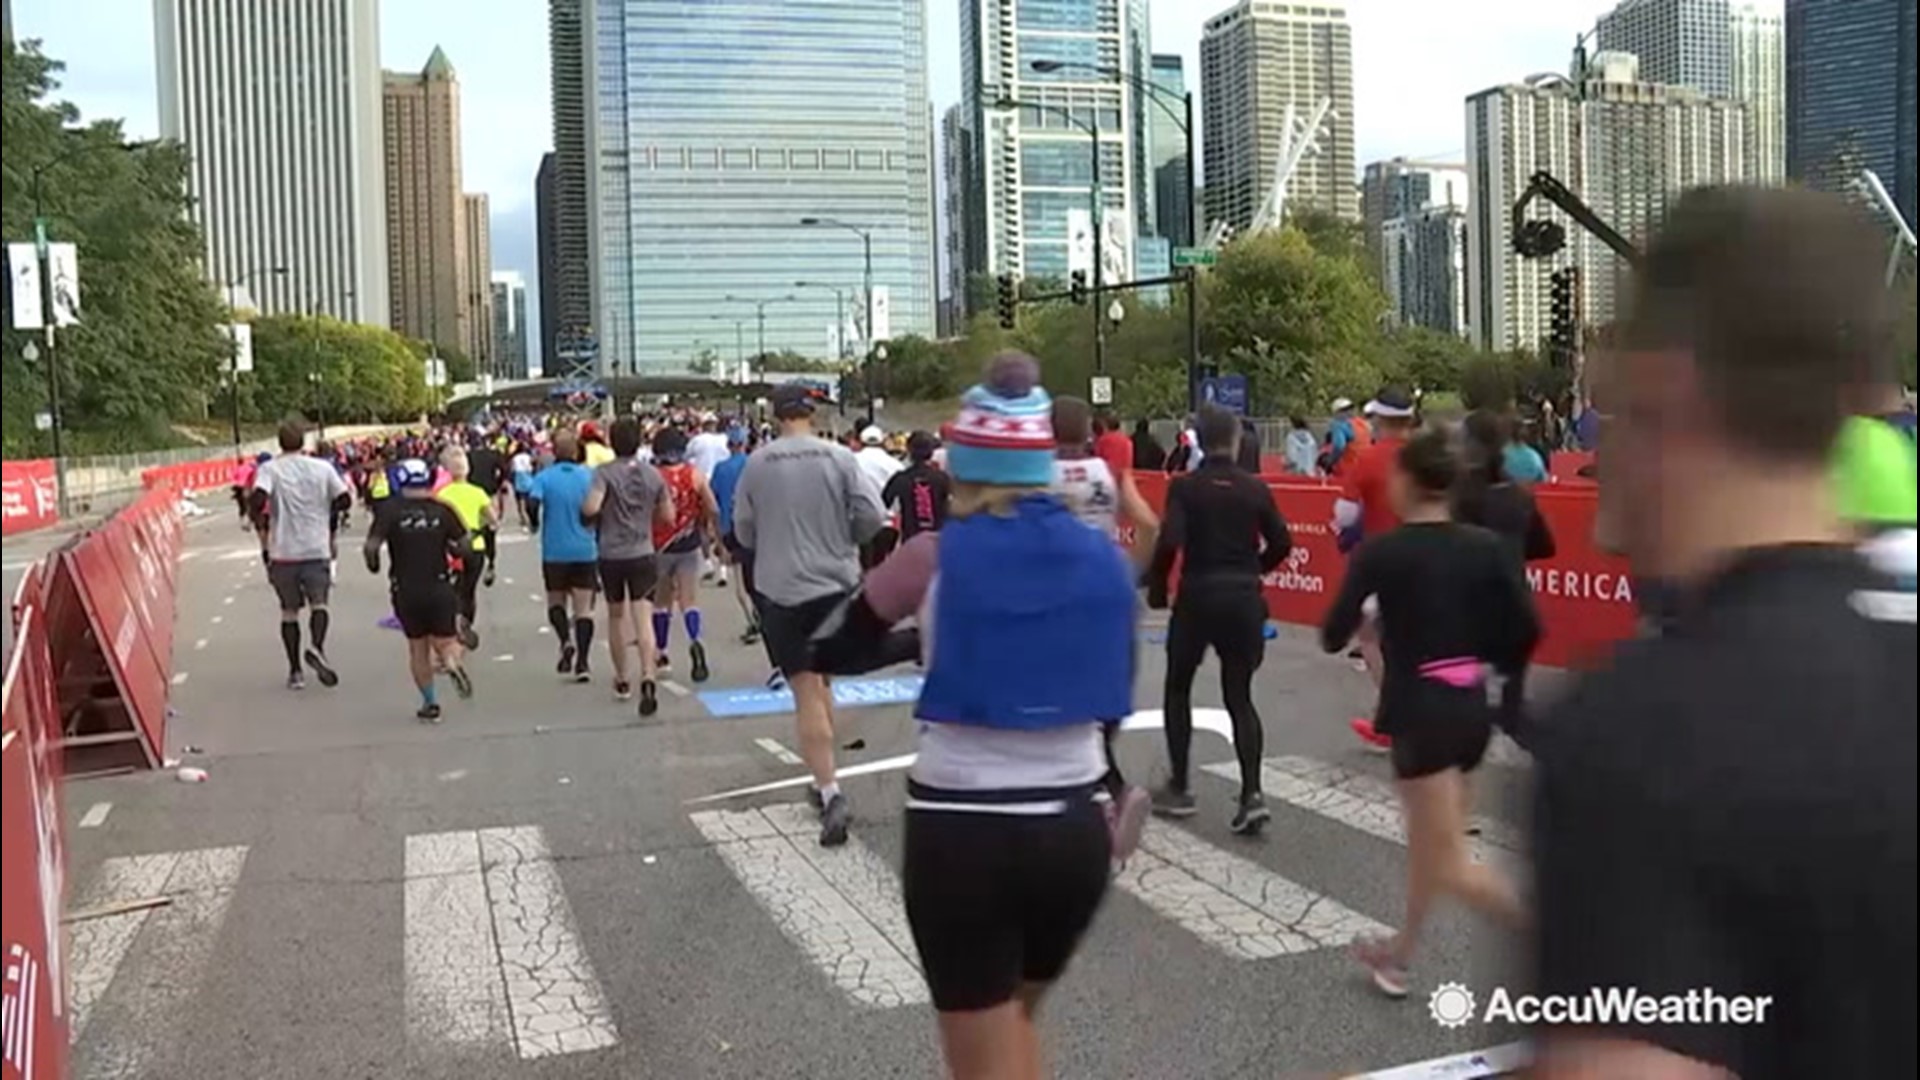 Sunday morning, kicked off the Chicago Marathon, but it was a chilly one as temperatures were in the low to mid-40s as the race started. However, the runners were certainly charged up and ready to run.